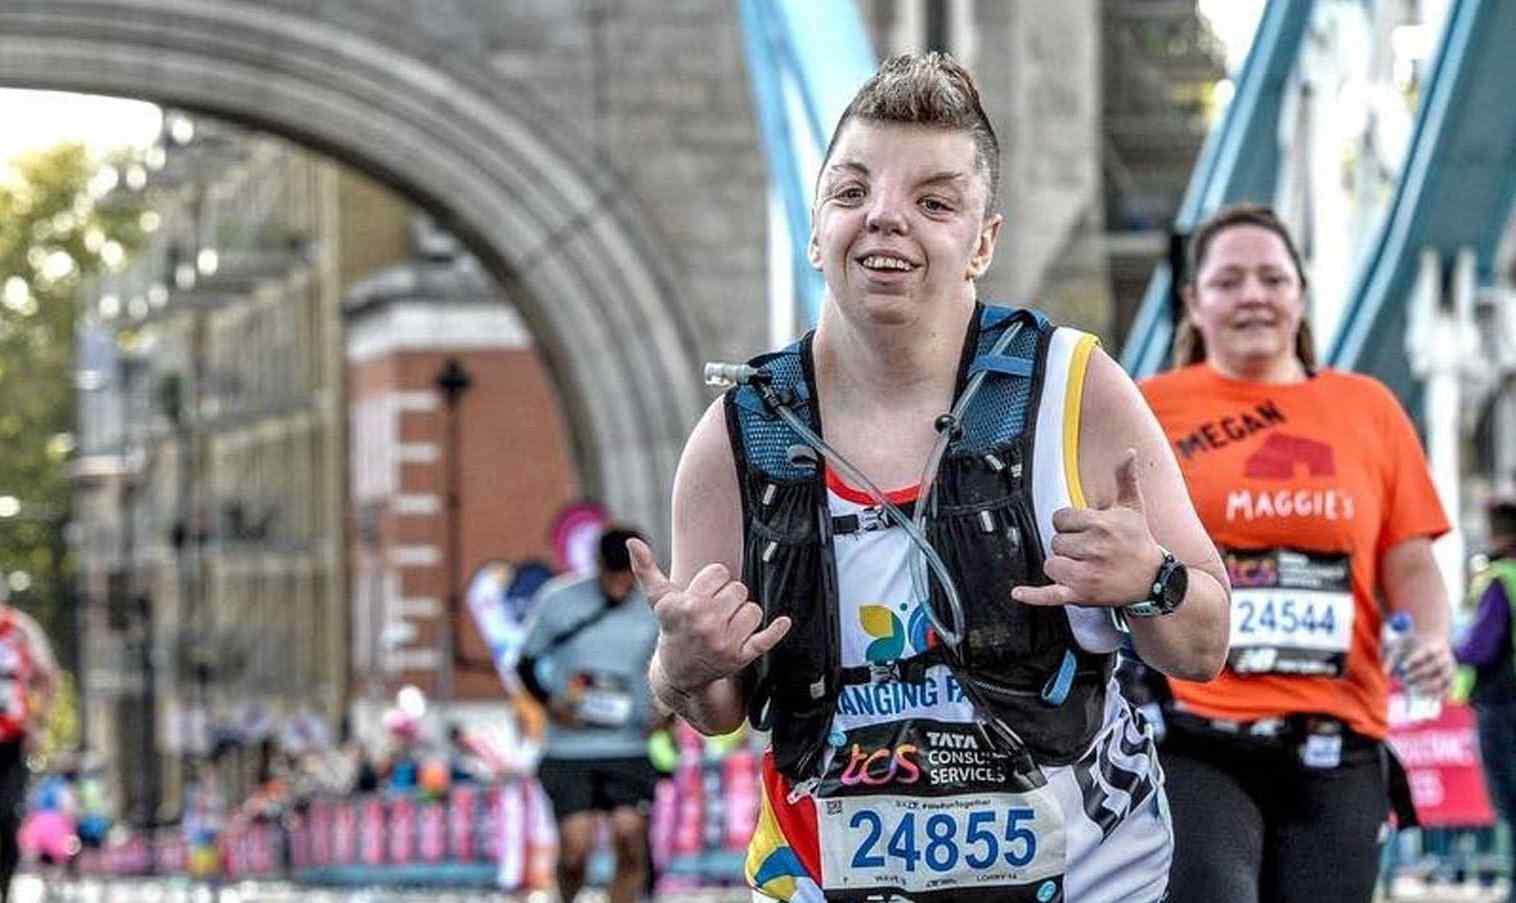 Ella ran the London Marathon for Changing Faces in 2022